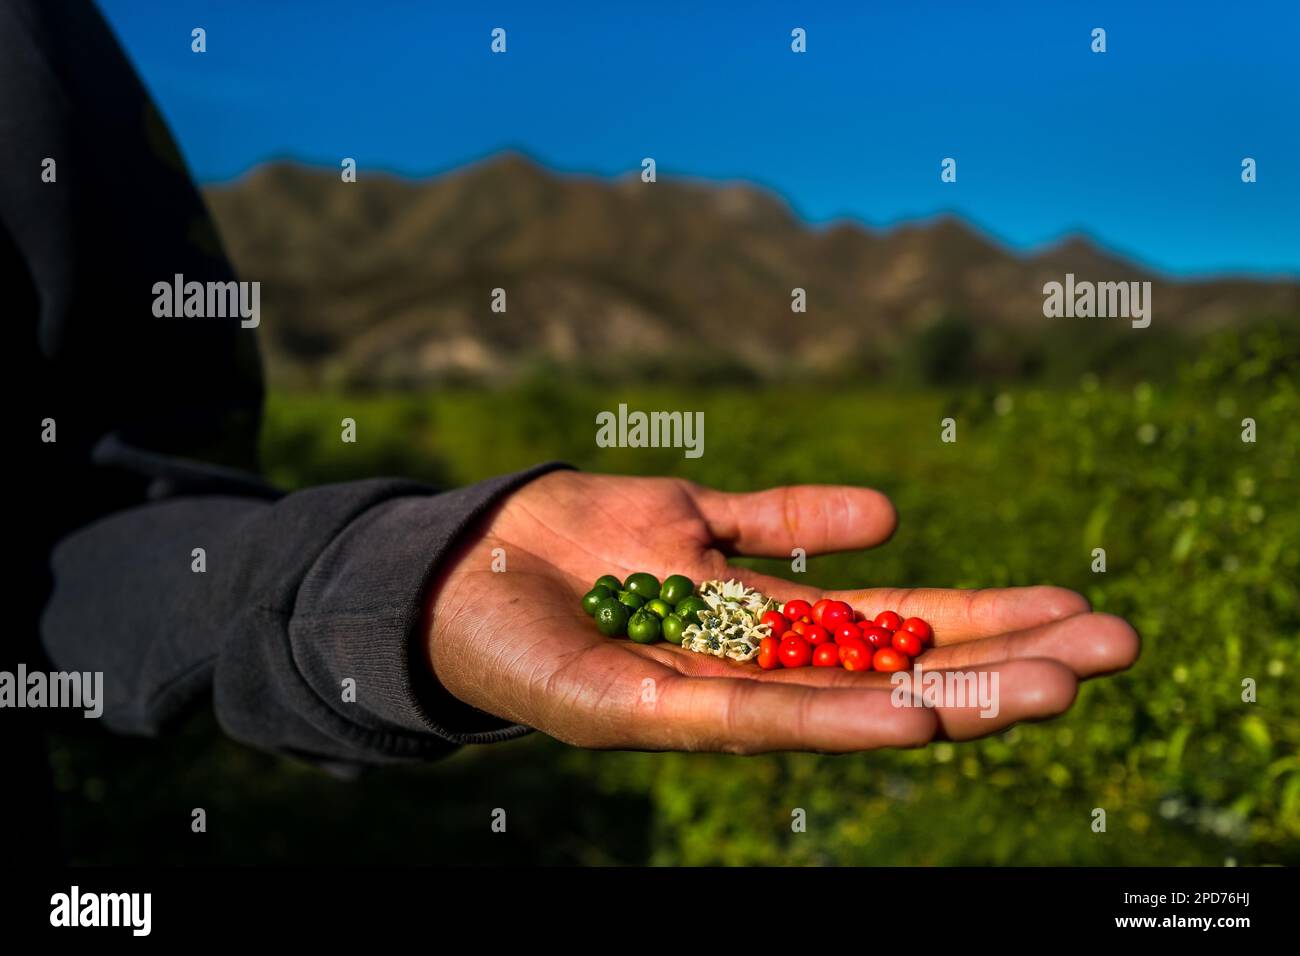 Chiltepin peppers, imitating the colours of the Mexican flag, are seen in a peasant’s hand during a harvest on a farm near Baviácora, Sonora, Mexico. Stock Photo